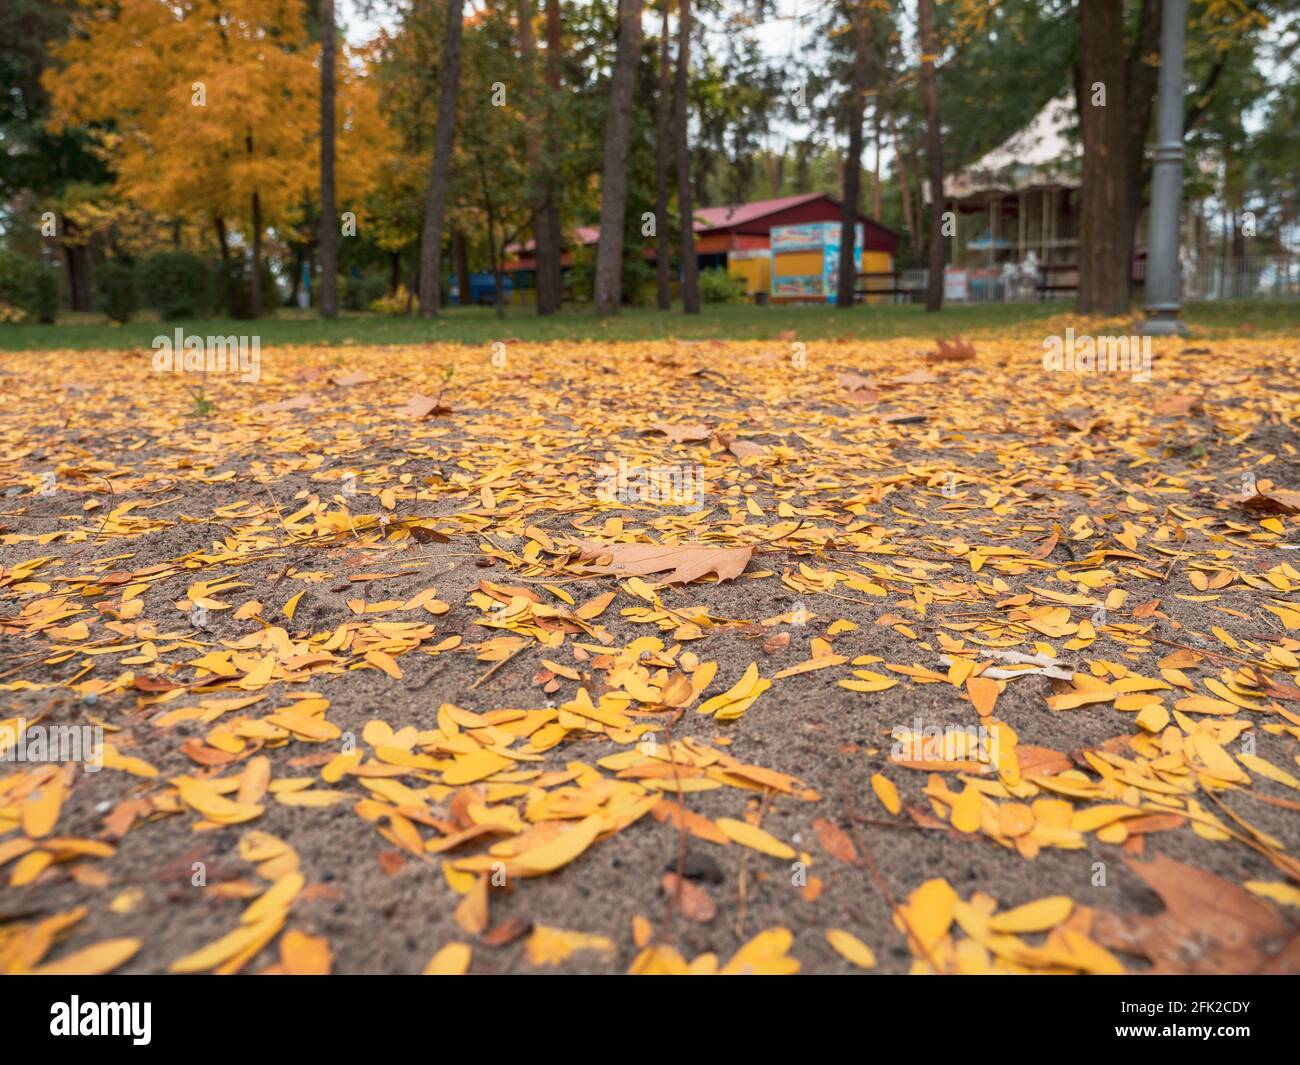 Beautiful natural background of colorful yellow and orange autumn fallen leaves in a city park. Stock Photo